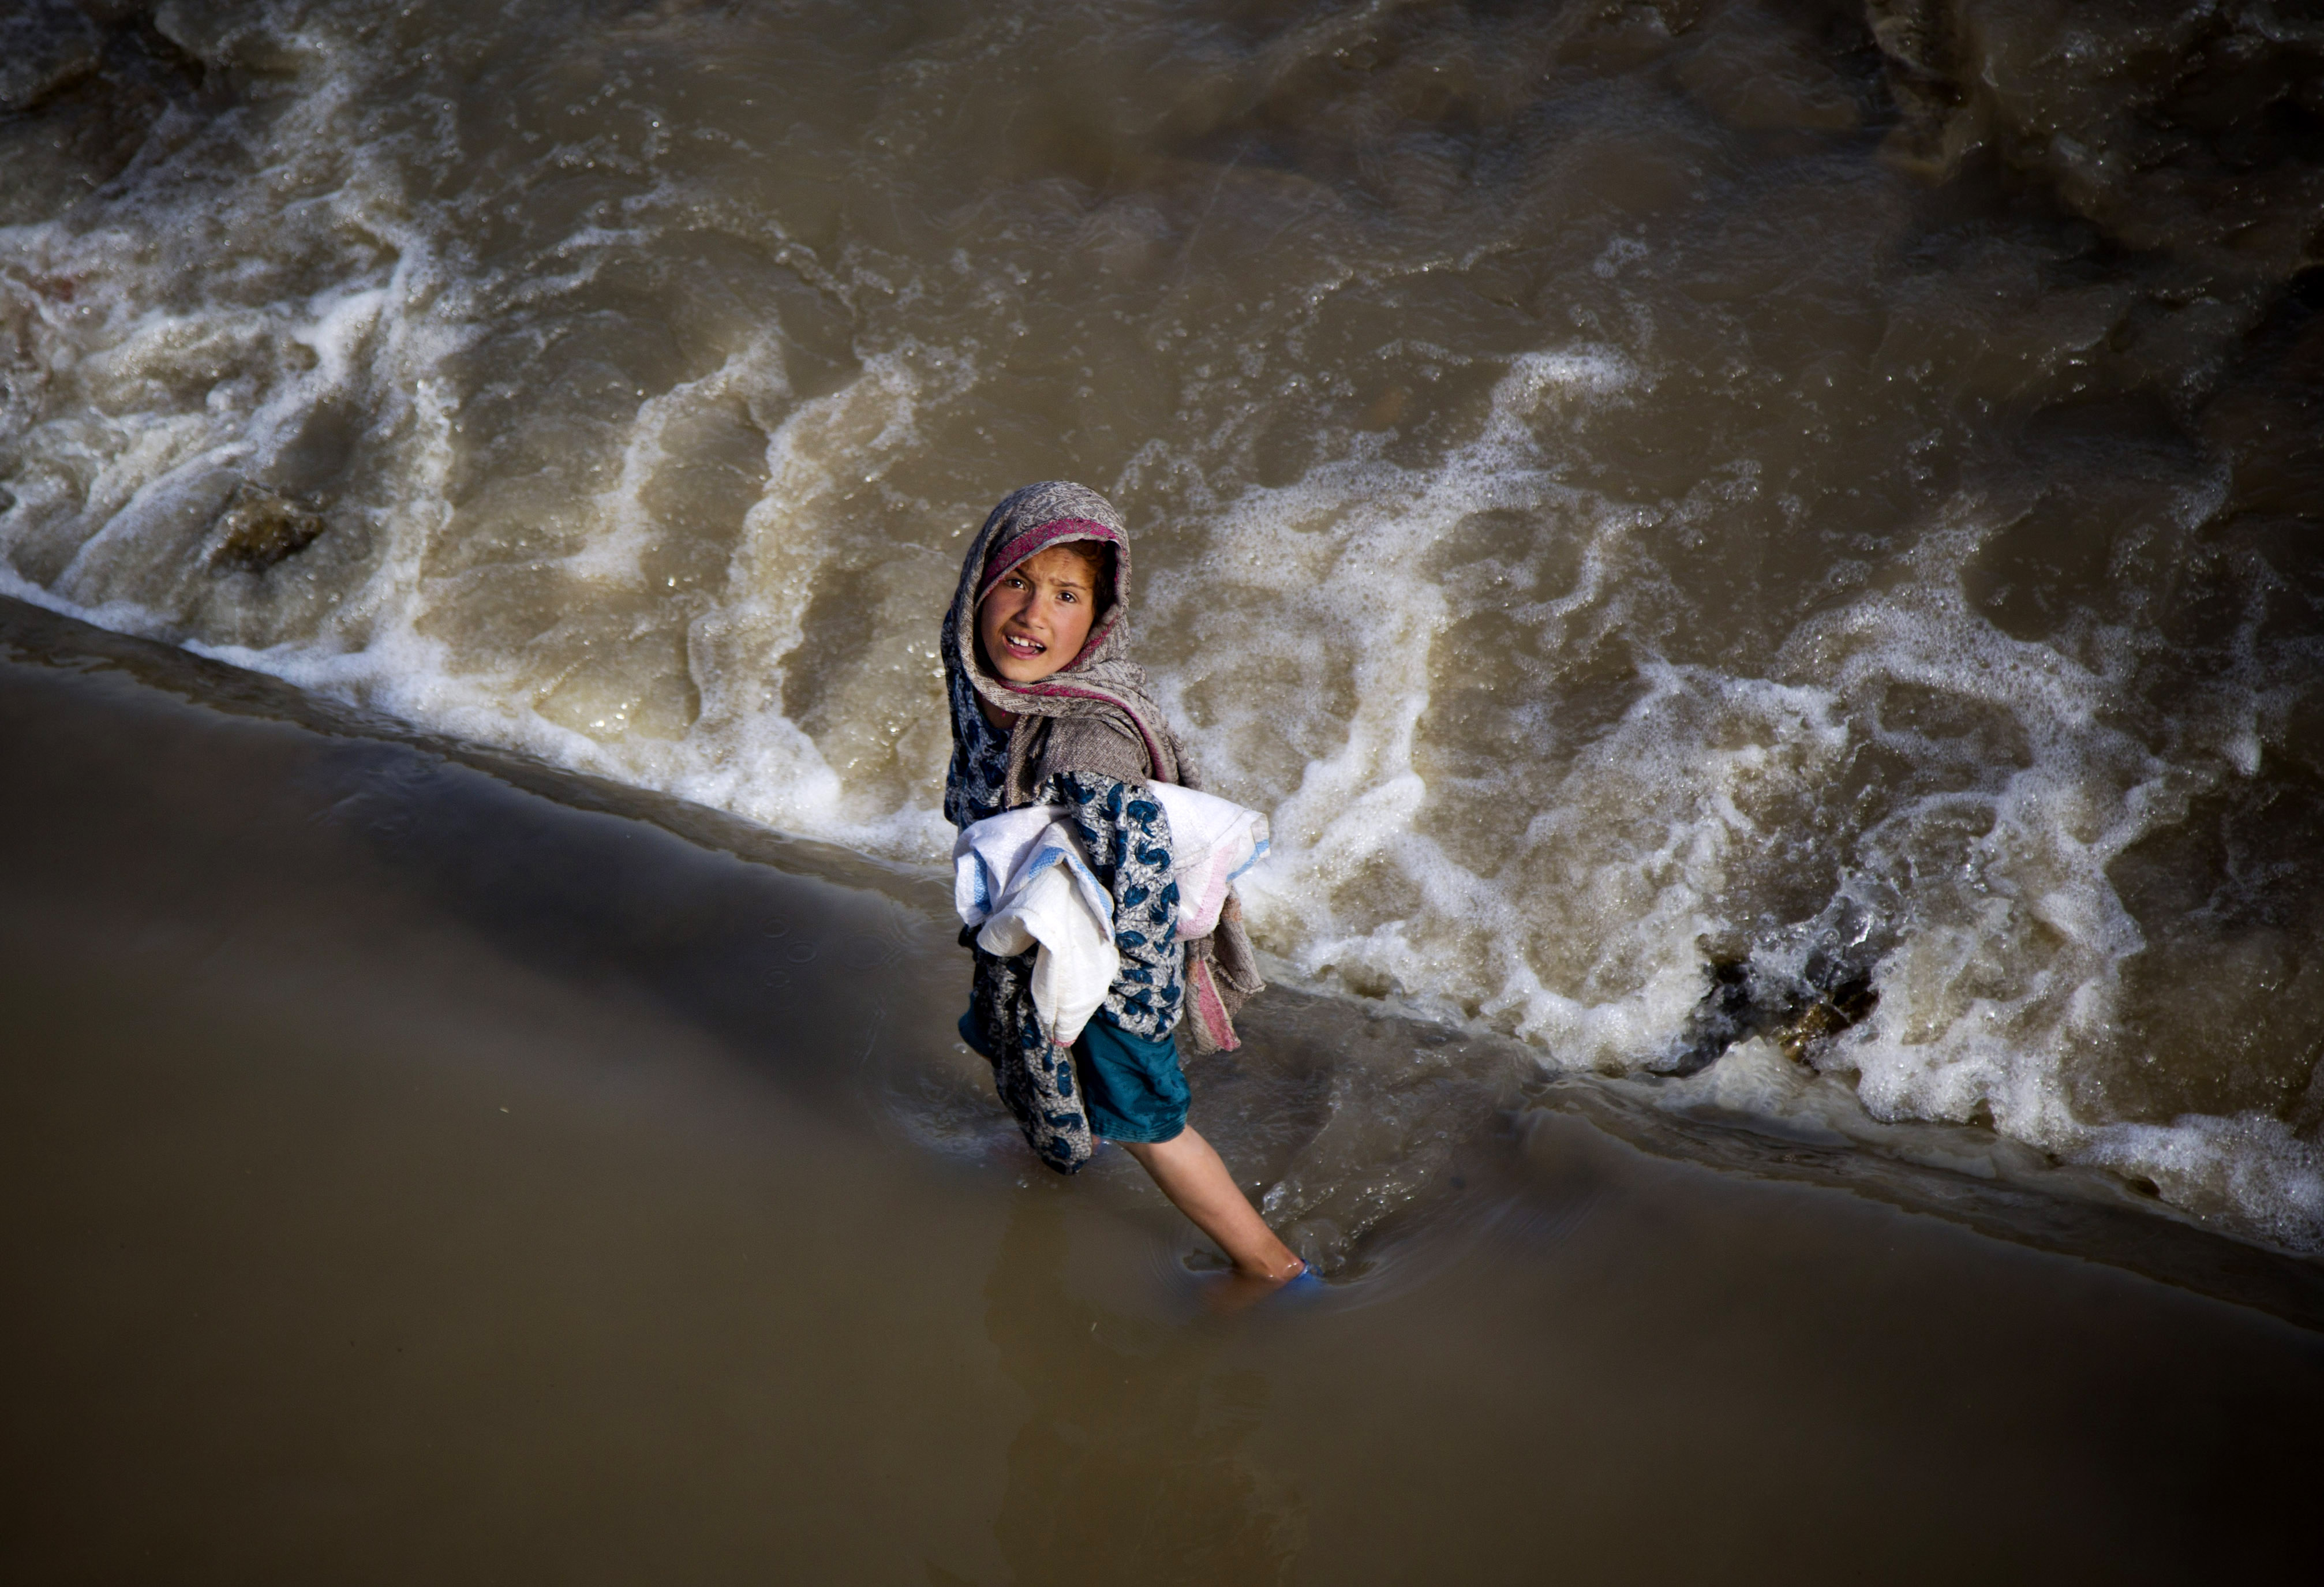 An Afghan girl takes a short cut through a streaming river on the outskirts of Kabul, Afghanistan, Wednesday, May 15, 2013. Temperatures in Kabul have risen to 27 degrees Celsius (82 degrees Farhreinheit), bringing children out to play in streams. (AP Photo/Anja Niedringhaus)